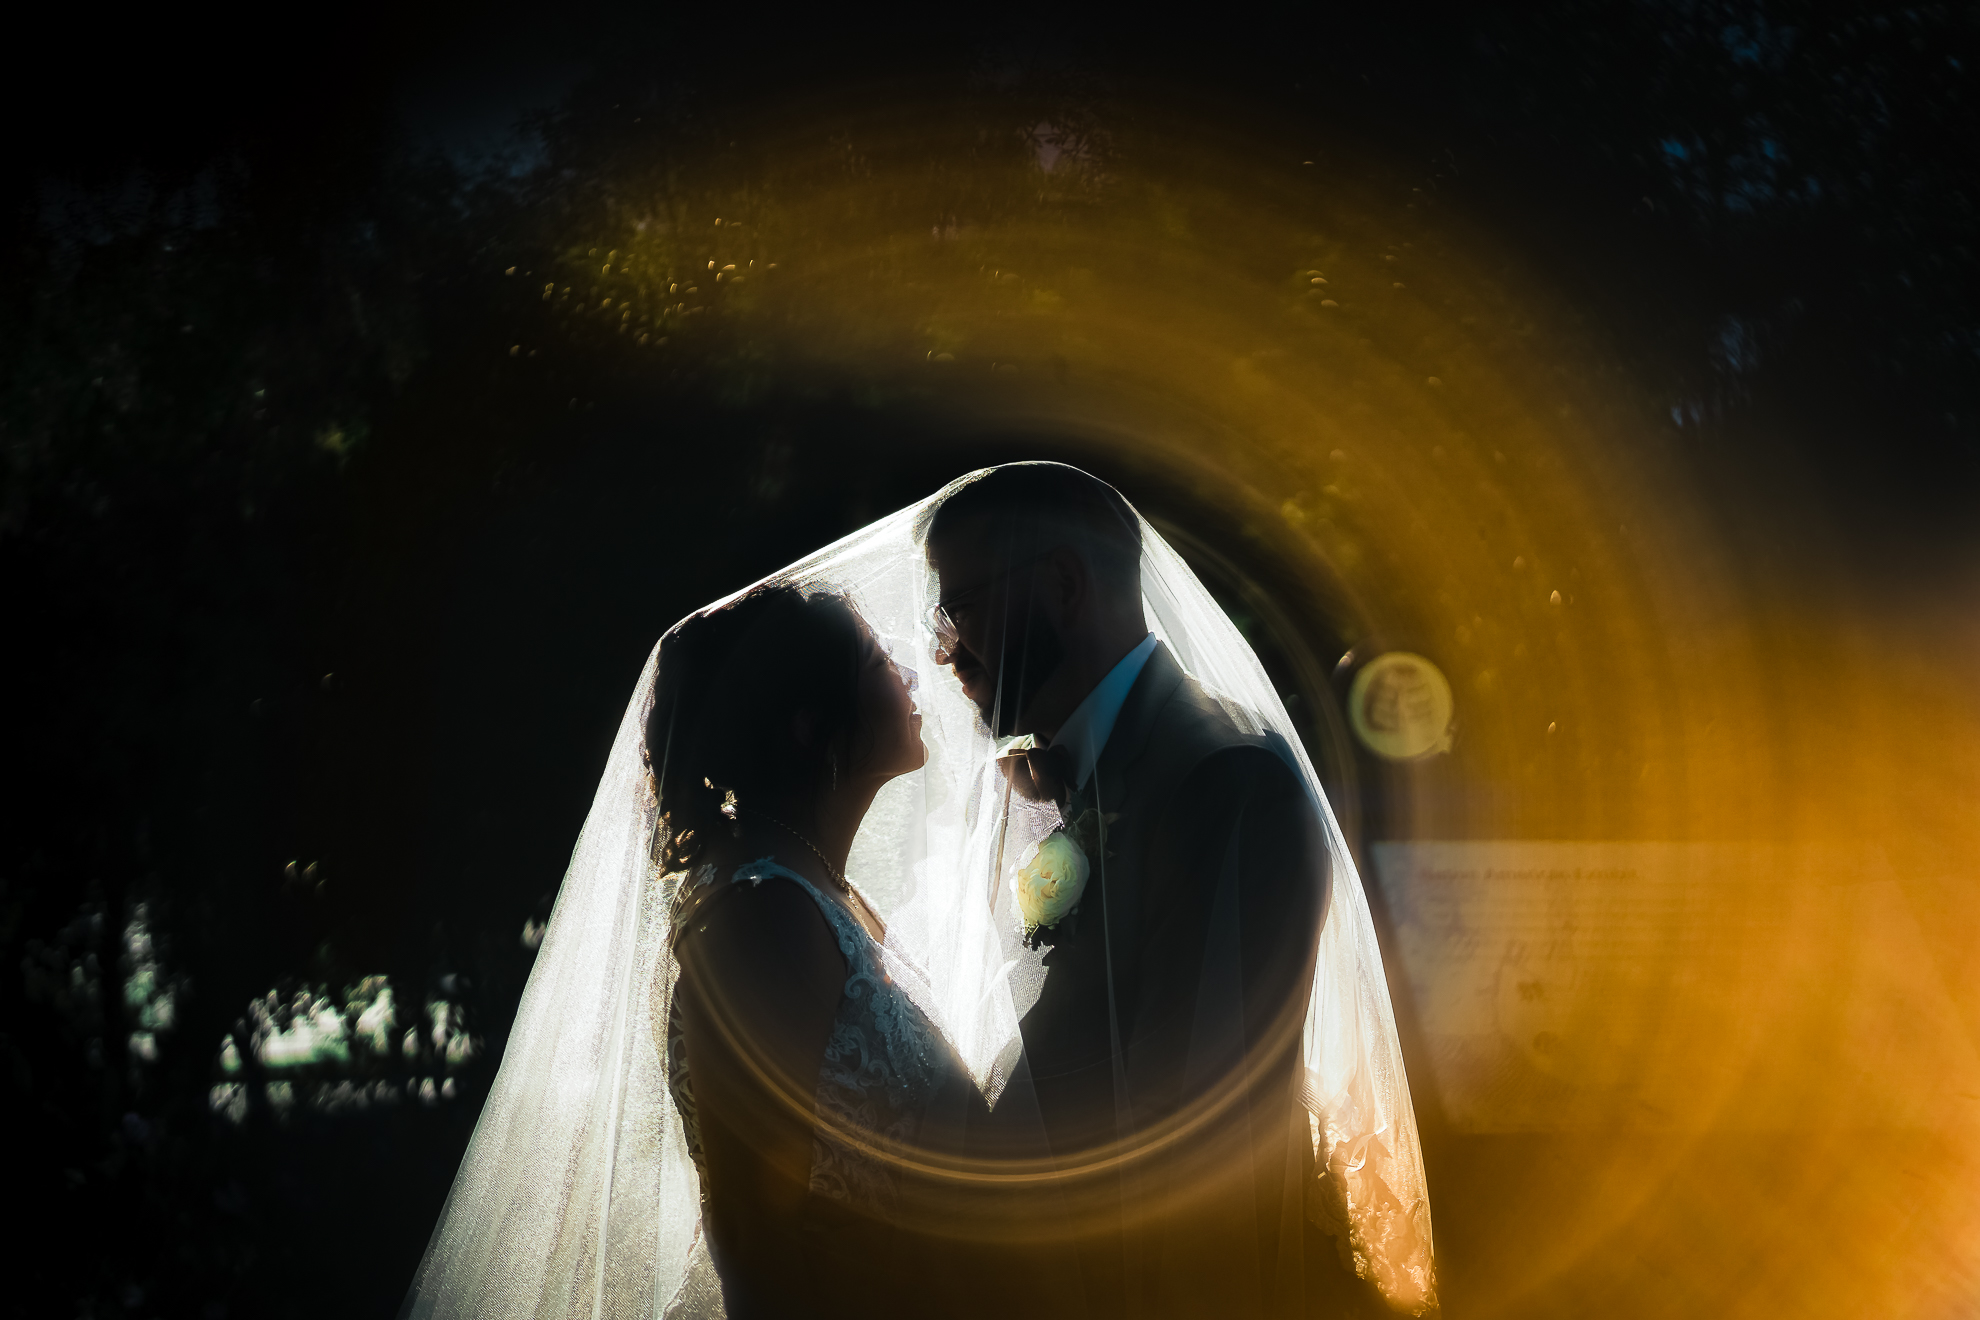 ThomasKim_photography A bride and groom are beautifully silhouetted in the light of the sun.